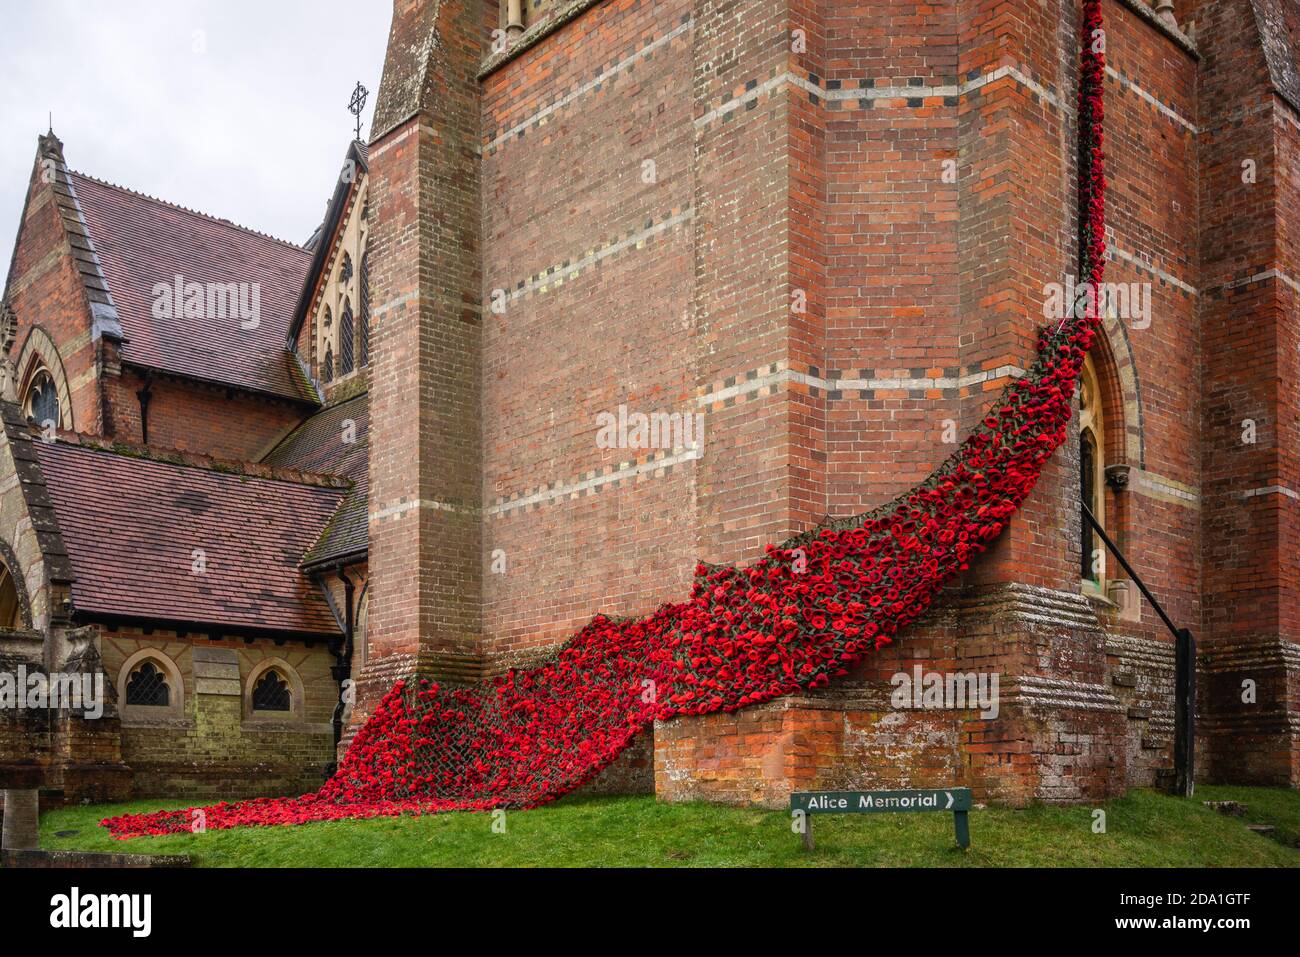 'Fall of Poppies for the Fallen' display of hand-knitted red poppies at Lyndhurst Church during Remembrance Sunday in November 2020, Lyndhurst, UK Stock Photo